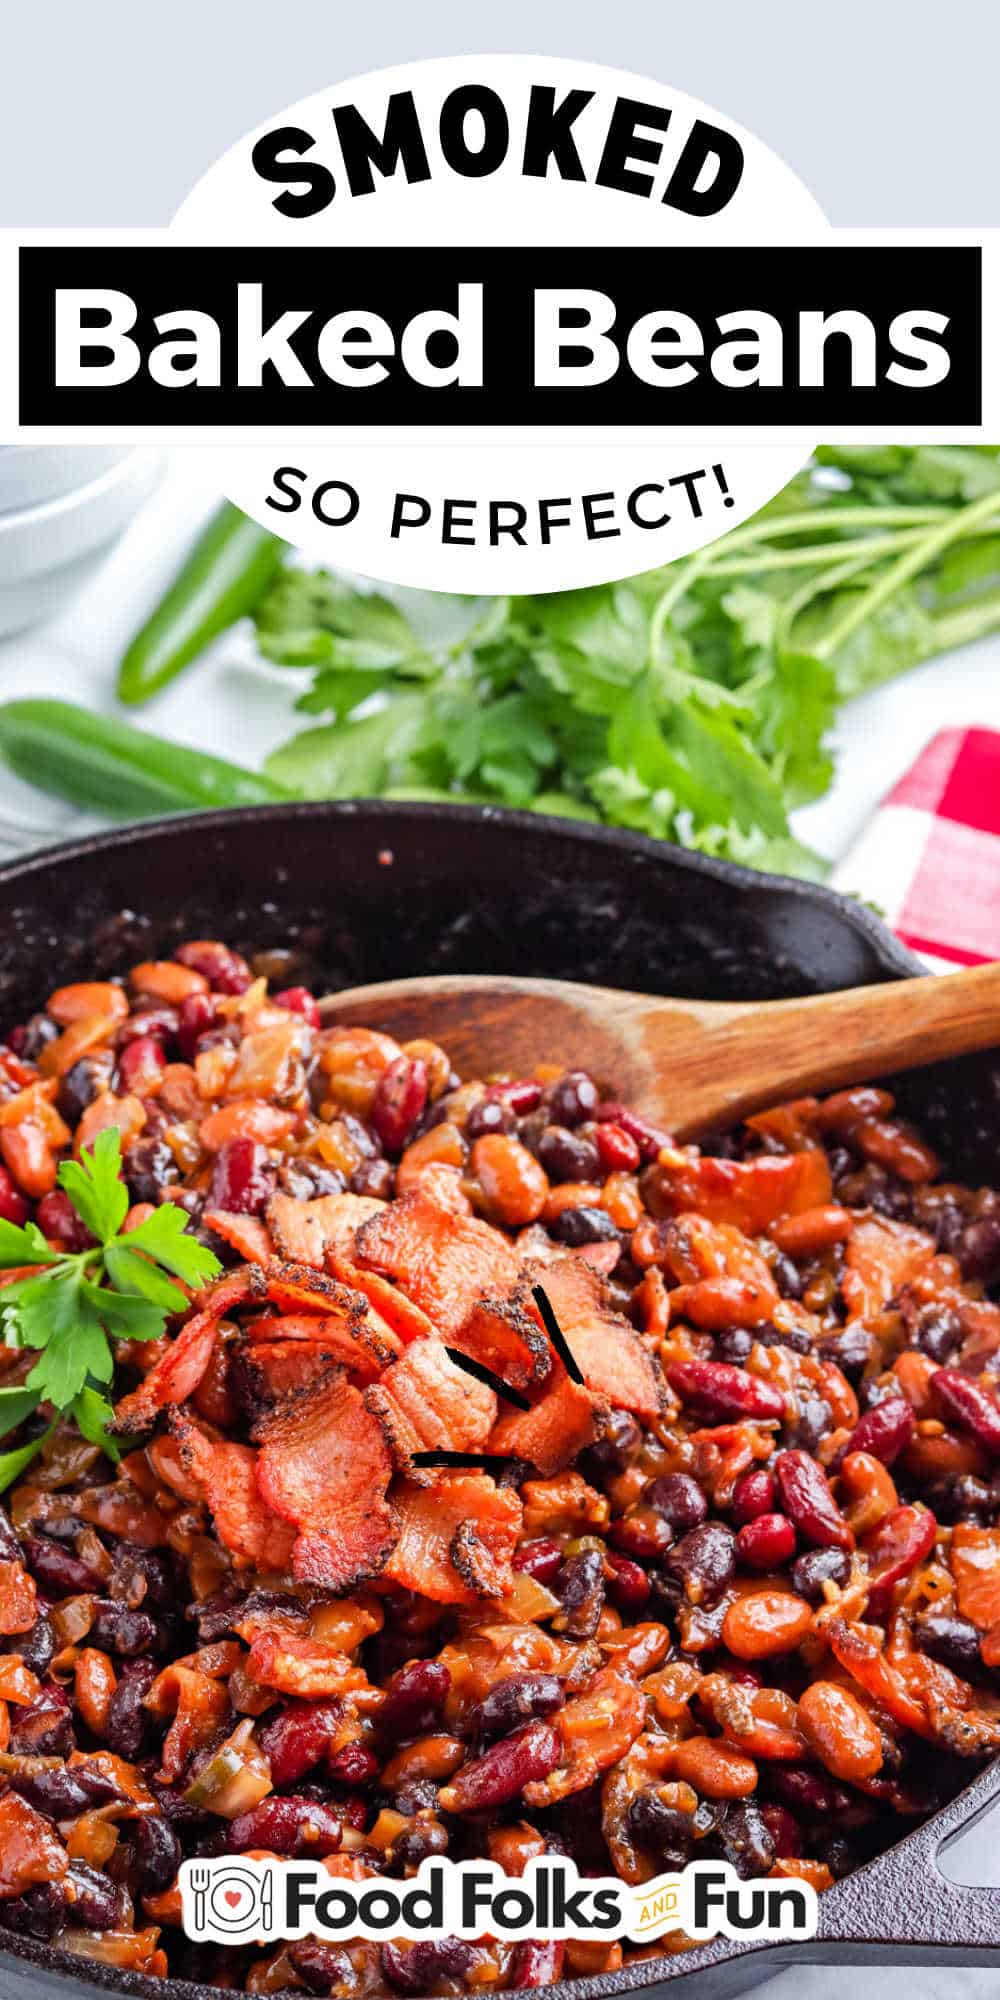 Elevate baked beans with smoky goodness! Try these easy smoked baked beans for a delicious twist on an American classic. via @foodfolksandfun